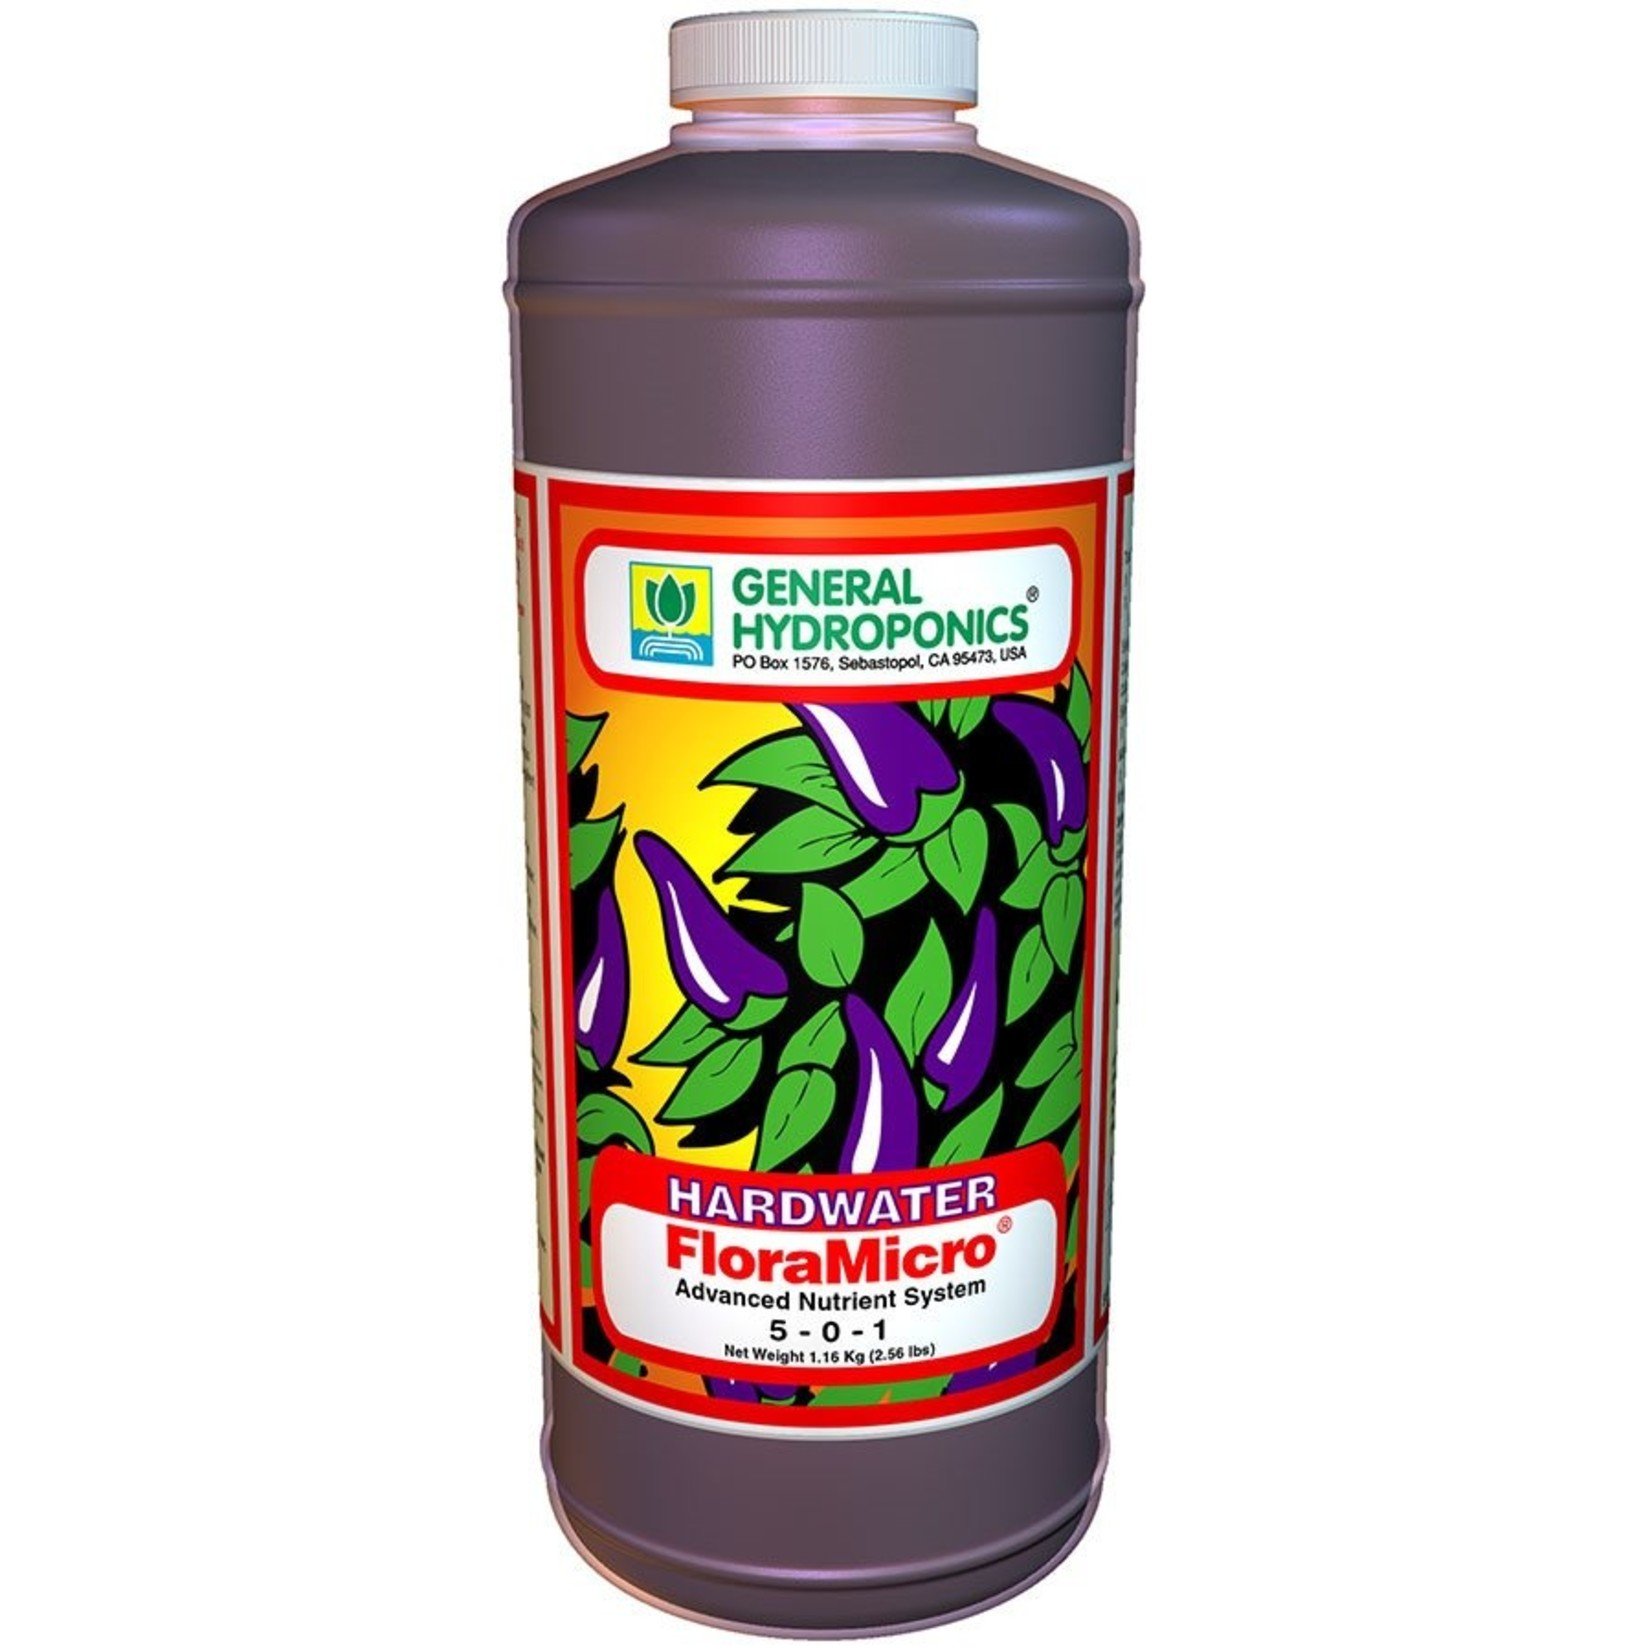 General Hydroponics GH FLORAMICRO HARDWATER